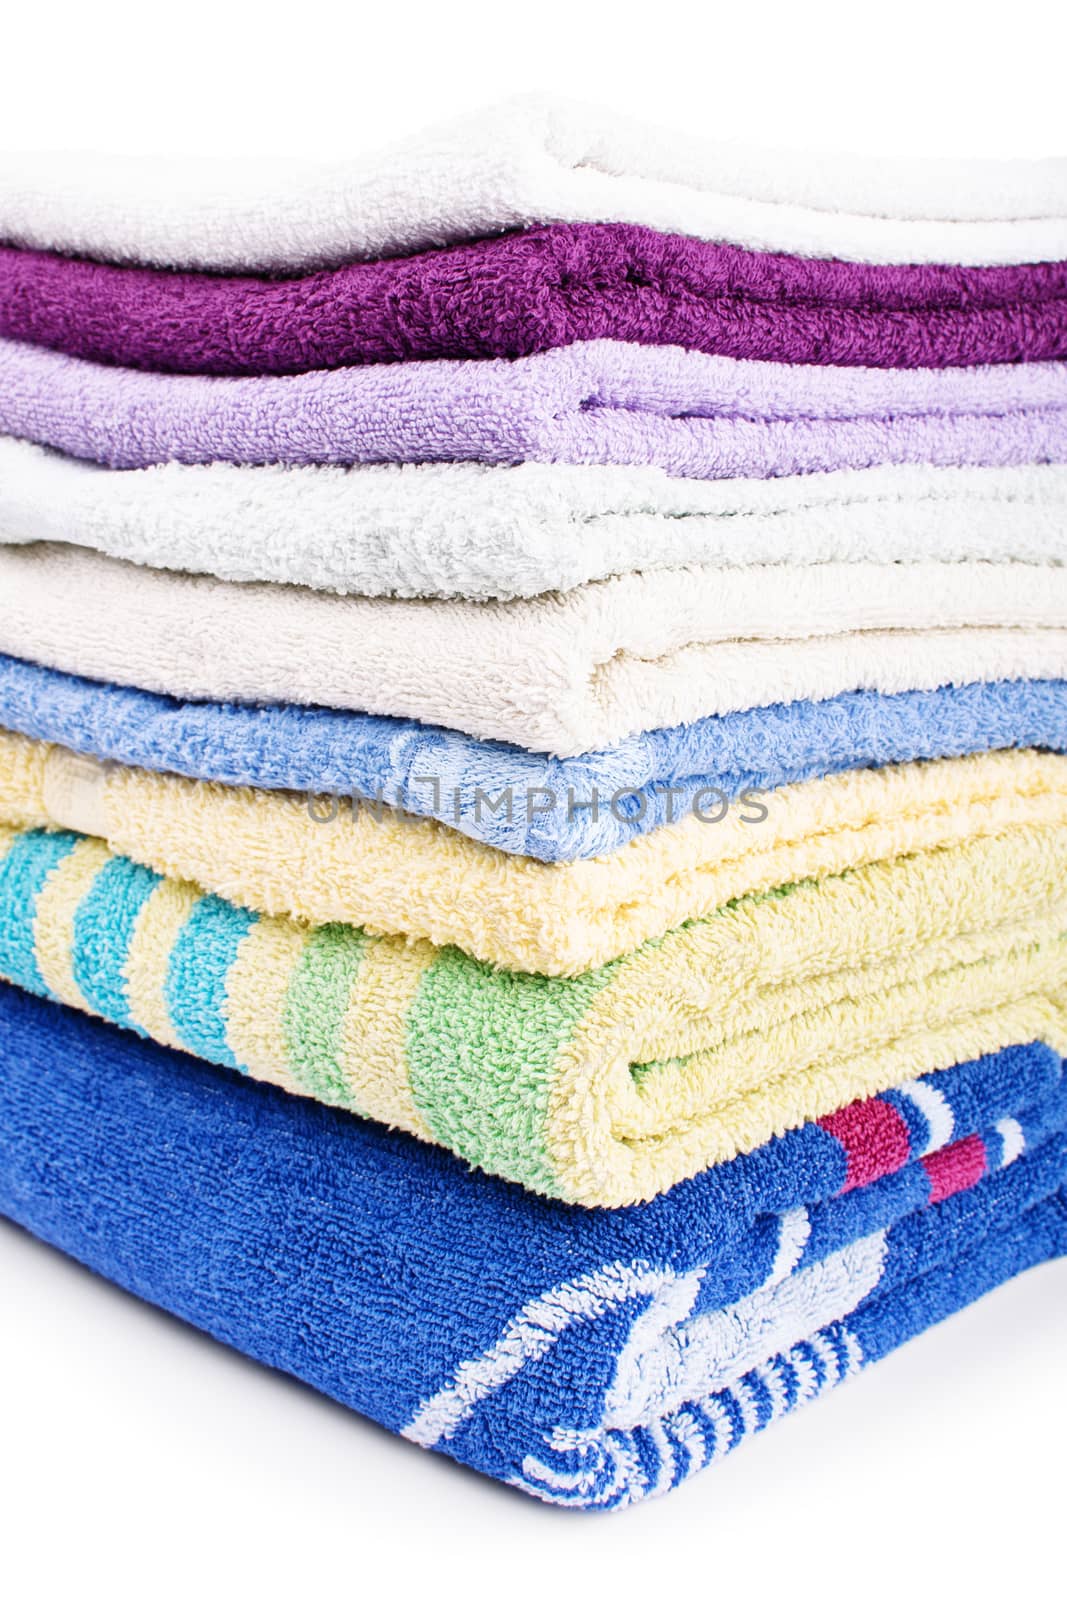 Stack of towels by Mendelex